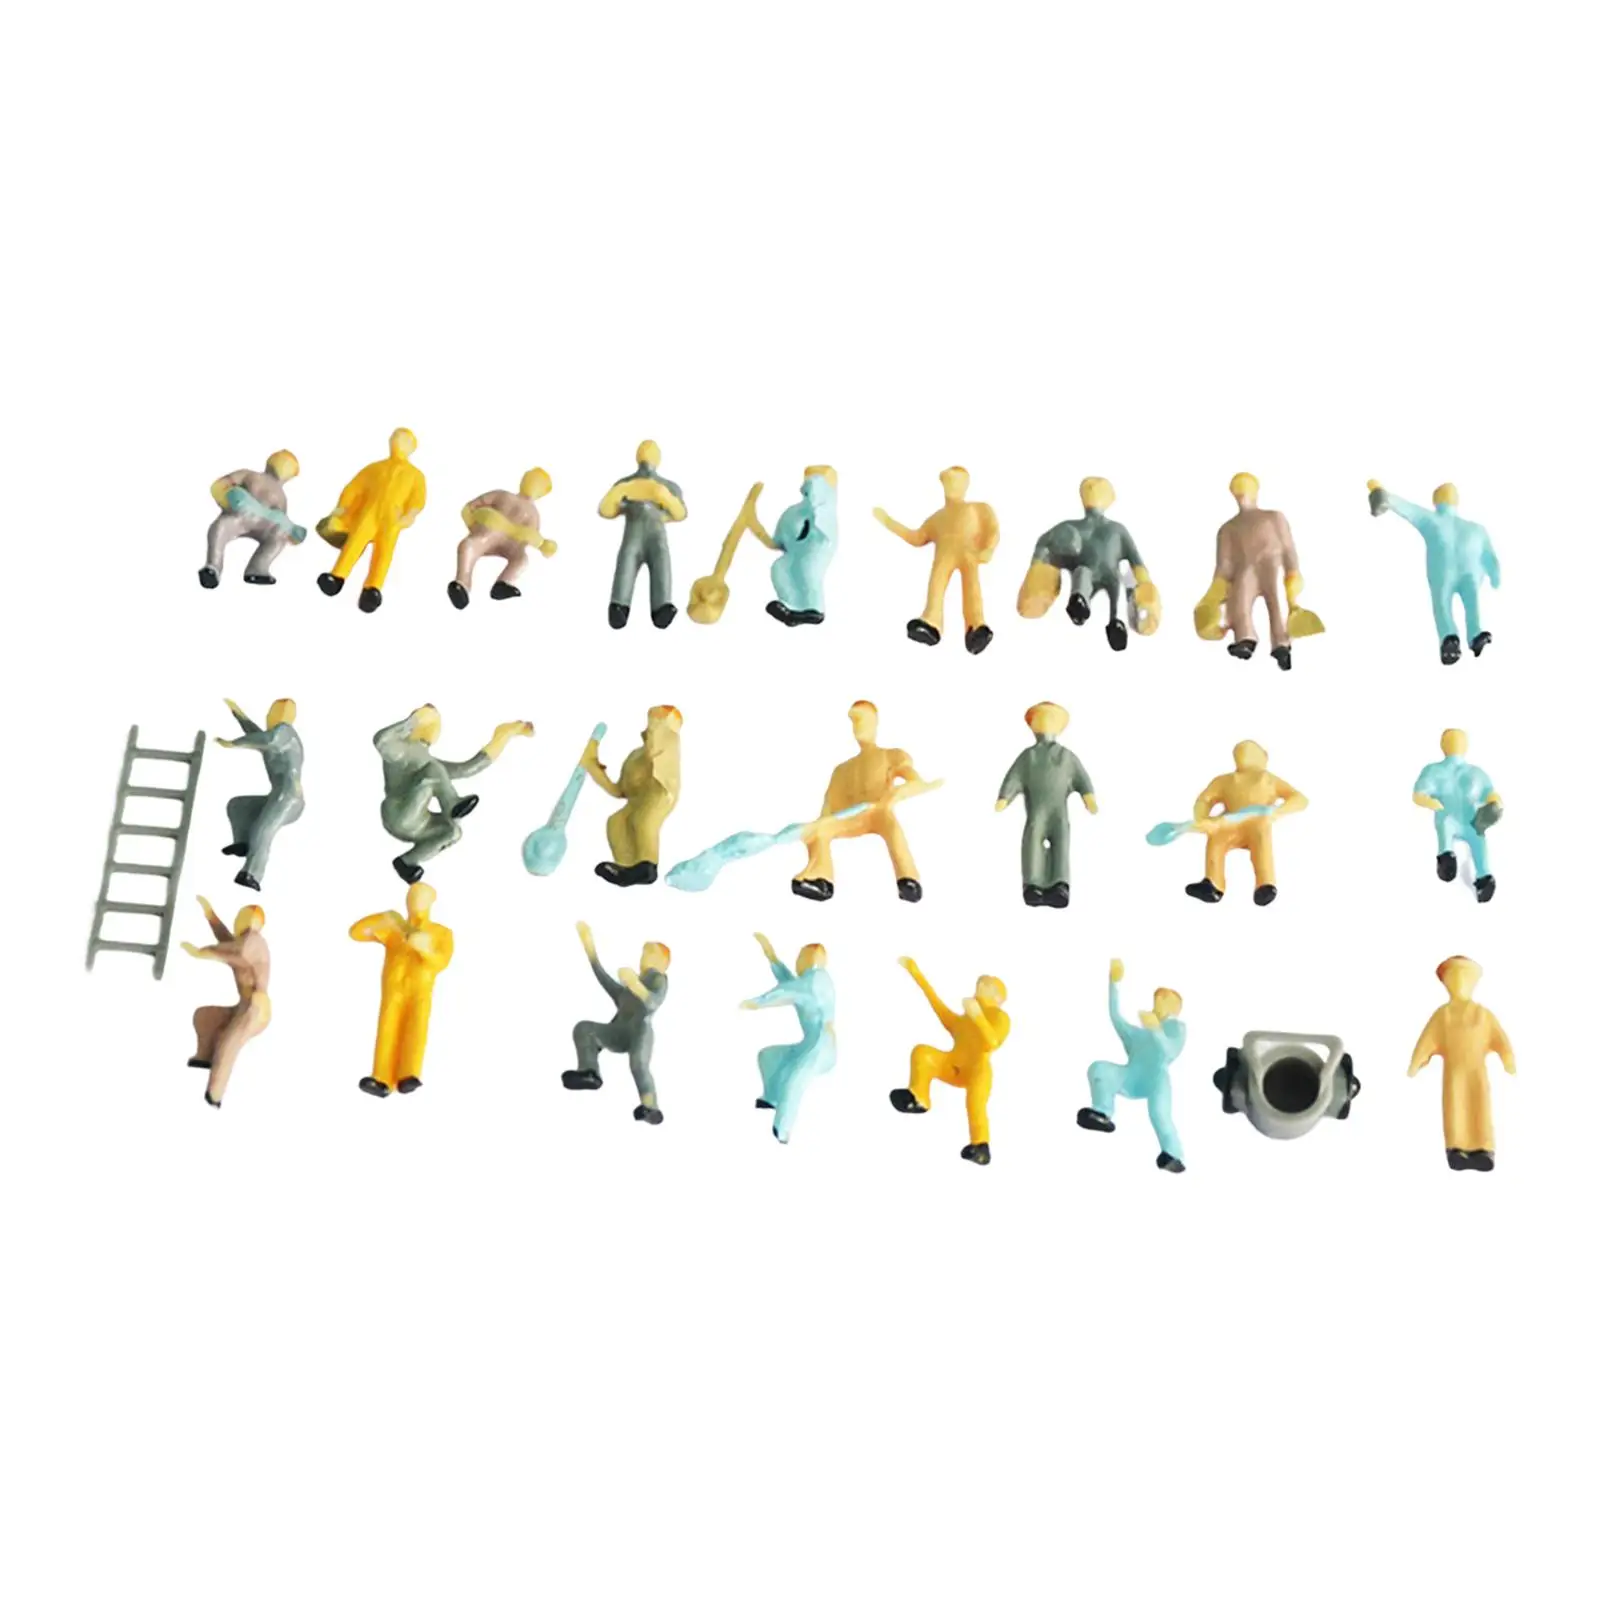 25x 1/87 Miniature Model Railroad Worker Figures Train Track HO Scale Layout Sand Table Scene Hand Painted Figurines Supplies